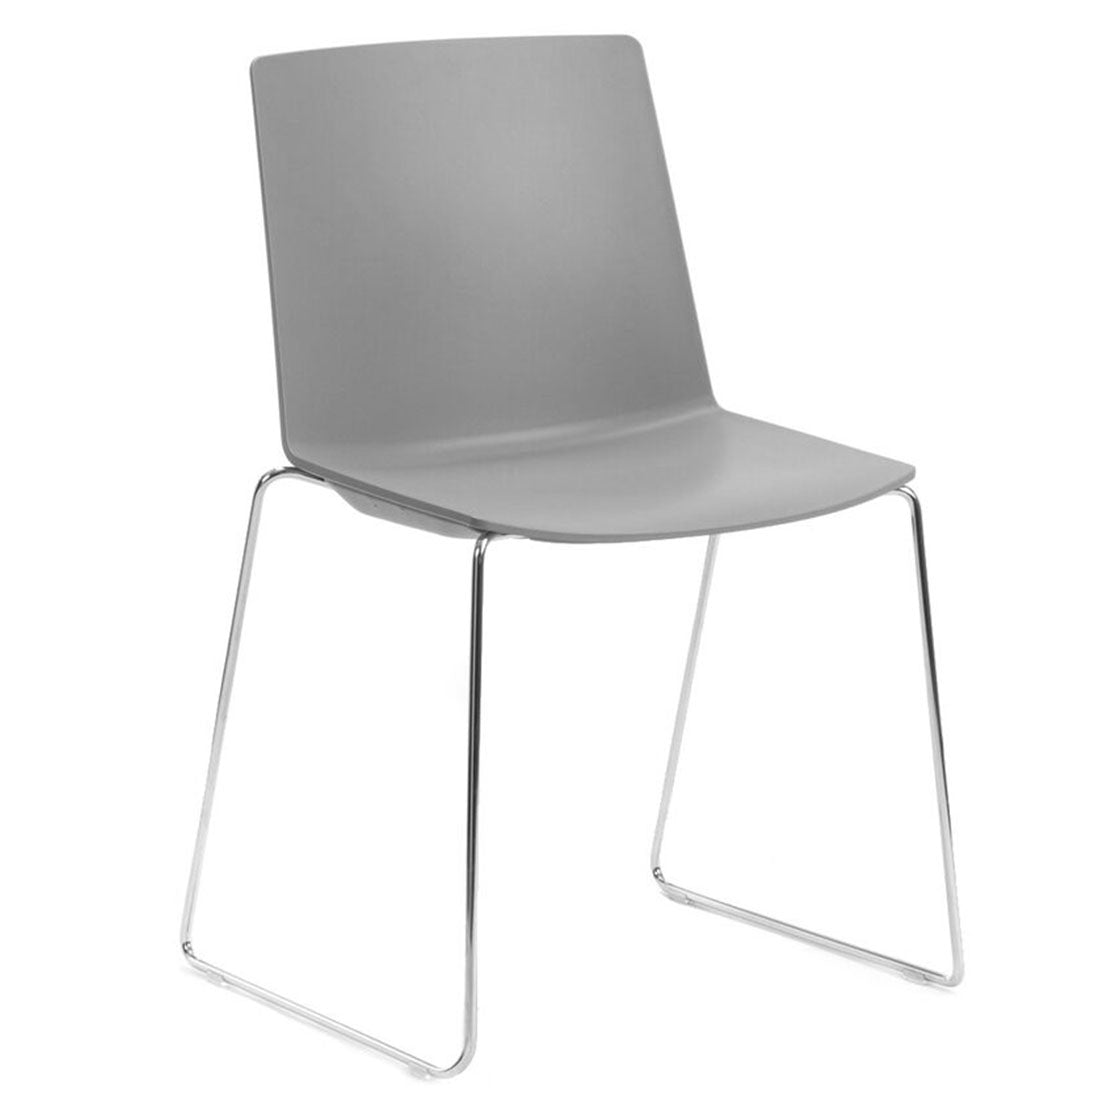 Jubel Visitor Chair - switchoffice.com.au